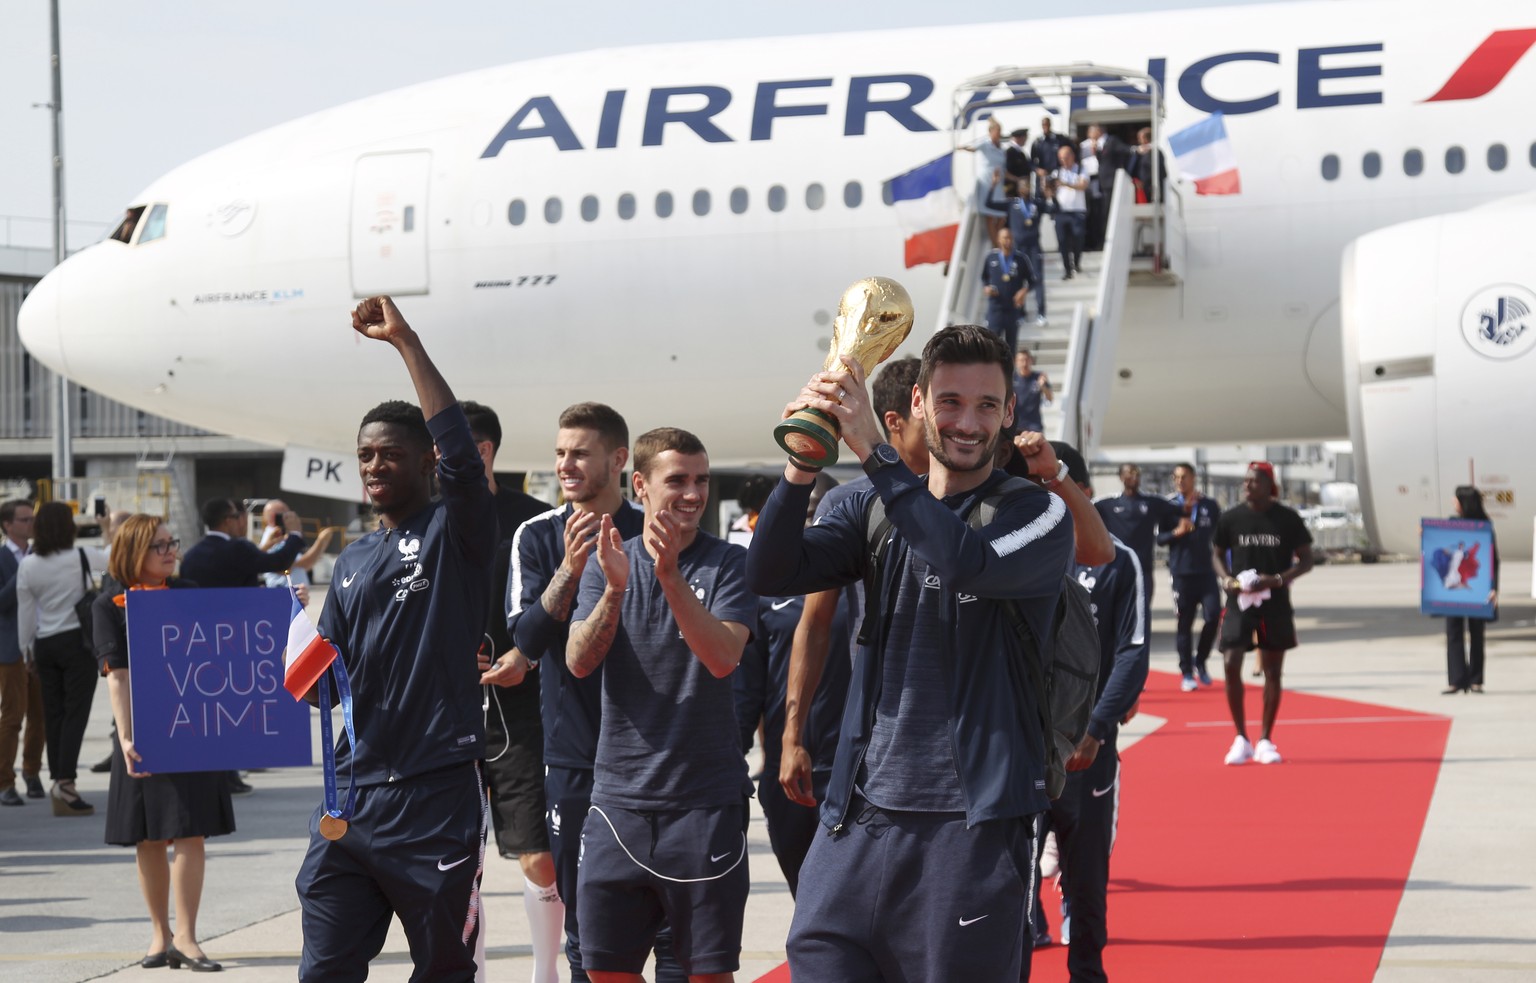 French goalkeeper Hugo Lloris holds the cup as the French soccer team arrives at Charles de Gaulle airport, Monday, July 16, 2018 in Roissy, north of Paris. France is preparing to welcome home the nat ...